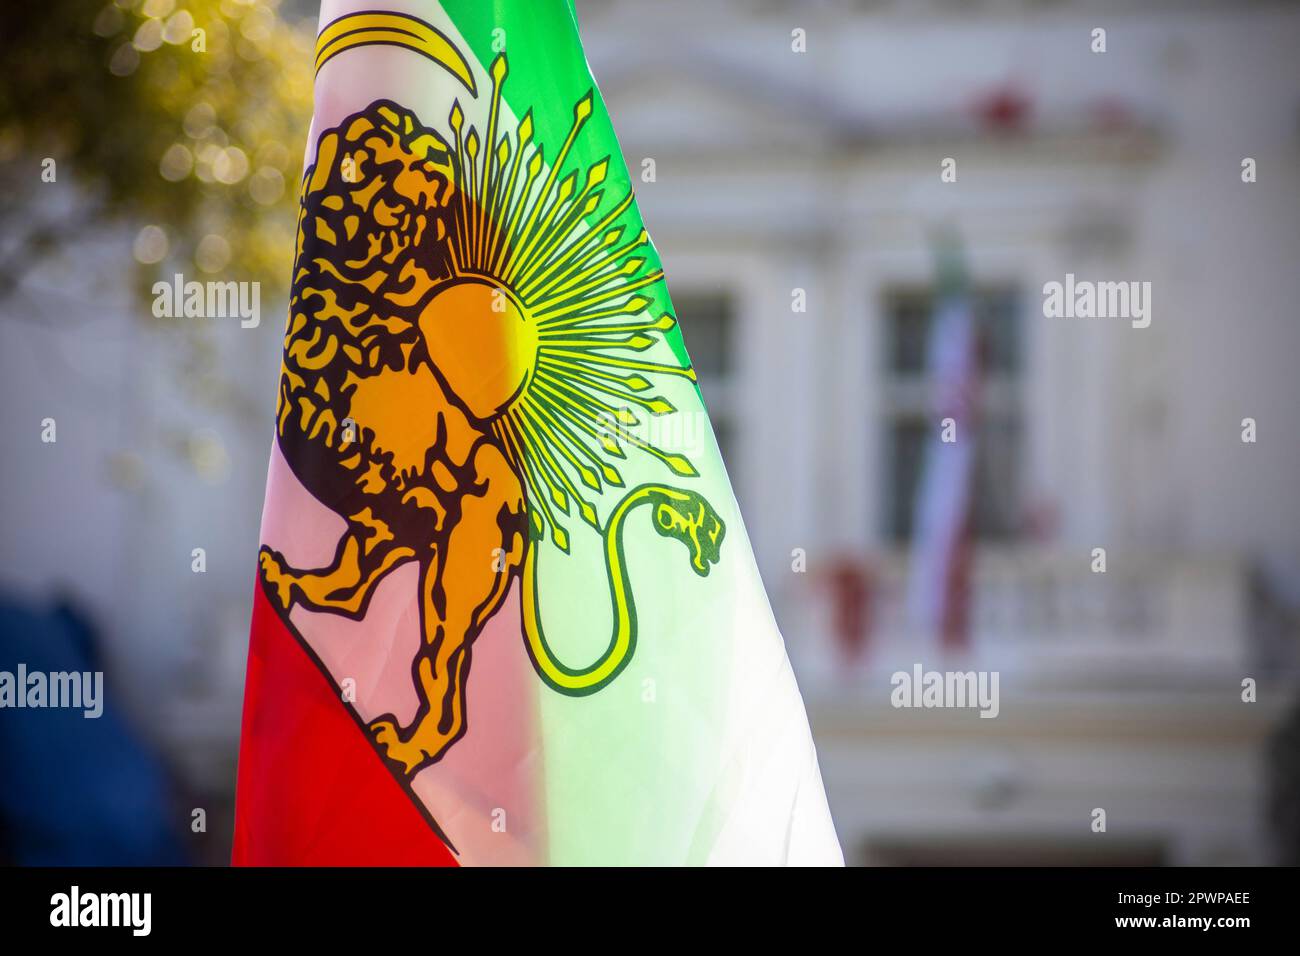 The Shir-o-Khorshid' (Lion and Sun) Flag of Iran is raised in front of Islamic Republic of Iran's Embassy in London. Stock Photo